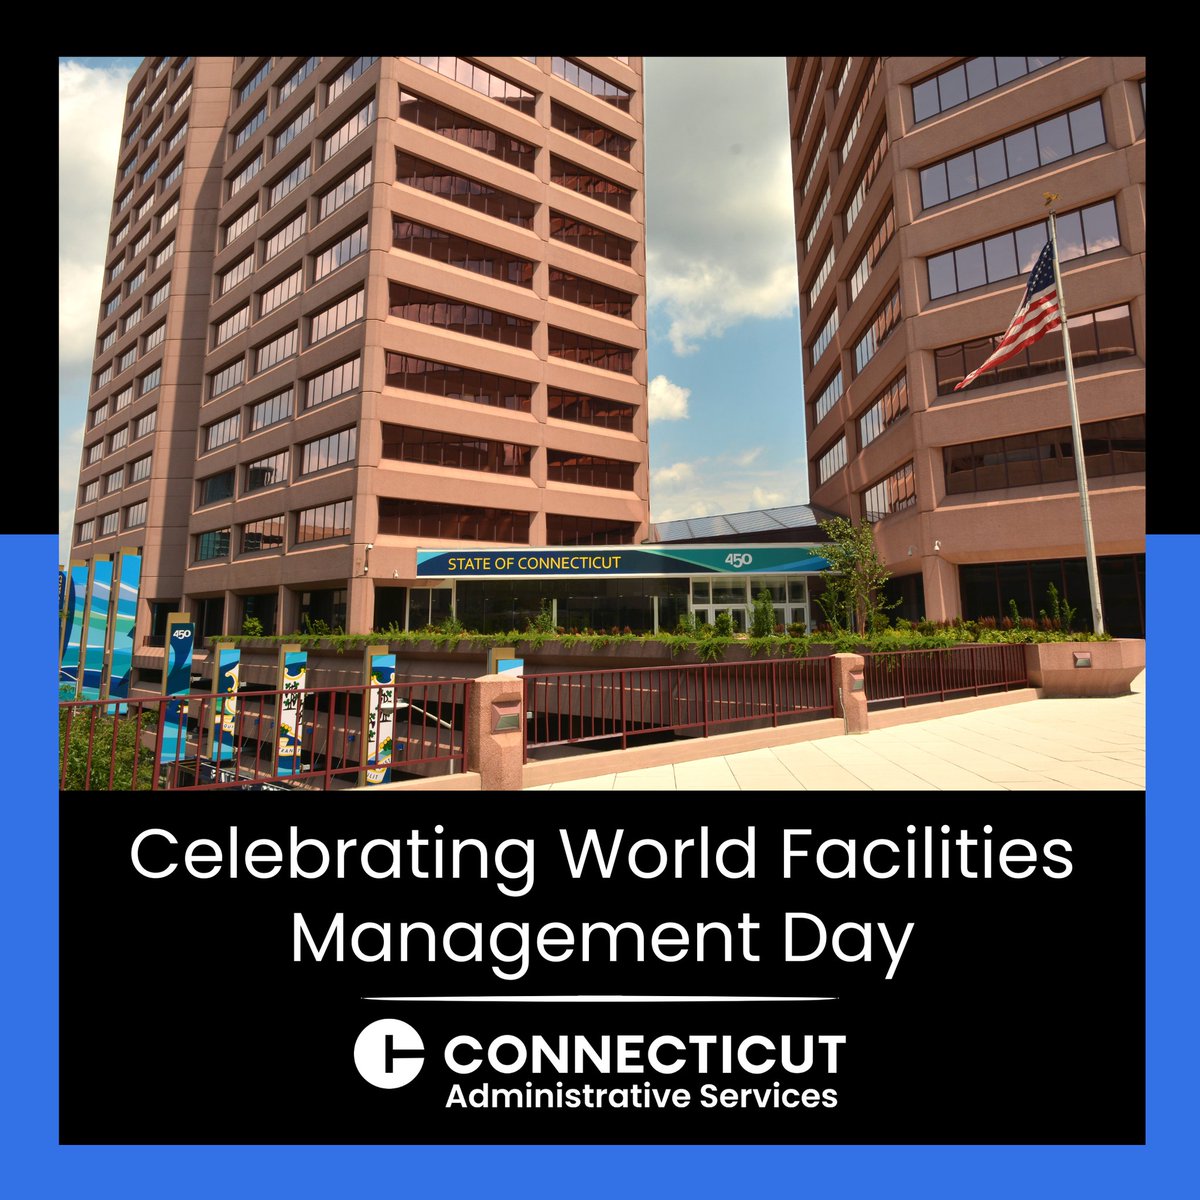 Happy World Facilities Management Day to all who celebrate, especially the incredible DAS facilities team.

Thanks to the DAS professionals who make the state's buildings clean, safe, and well-maintained places to work! Your tireless efforts are appreciated. #WorldFMDay